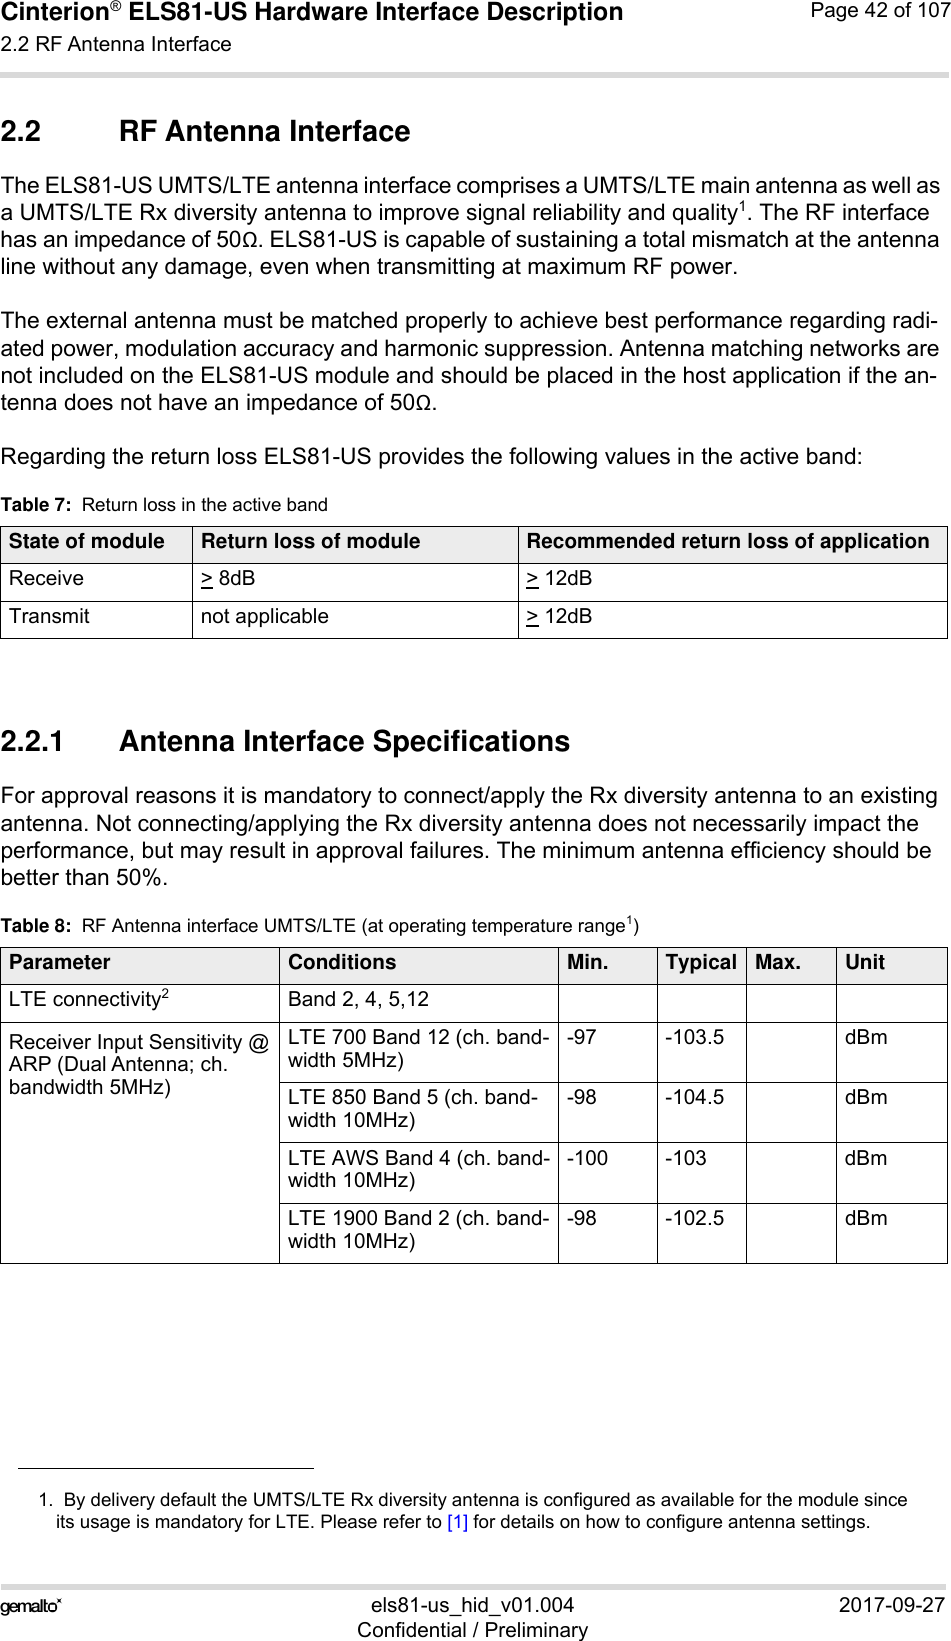 Cinterion® ELS81-US Hardware Interface Description2.2 RF Antenna Interface53els81-us_hid_v01.004 2017-09-27Confidential / PreliminaryPage 42 of 1072.2 RF Antenna InterfaceThe ELS81-US UMTS/LTE antenna interface comprises a UMTS/LTE main antenna as well as a UMTS/LTE Rx diversity antenna to improve signal reliability and quality1. The RF interface has an impedance of 50. ELS81-US is capable of sustaining a total mismatch at the antenna line without any damage, even when transmitting at maximum RF power.The external antenna must be matched properly to achieve best performance regarding radi-ated power, modulation accuracy and harmonic suppression. Antenna matching networks are not included on the ELS81-US module and should be placed in the host application if the an-tenna does not have an impedance of 50.Regarding the return loss ELS81-US provides the following values in the active band:2.2.1 Antenna Interface SpecificationsFor approval reasons it is mandatory to connect/apply the Rx diversity antenna to an existing antenna. Not connecting/applying the Rx diversity antenna does not necessarily impact the performance, but may result in approval failures. The minimum antenna efficiency should be better than 50%. 1.  By delivery default the UMTS/LTE Rx diversity antenna is configured as available for the module sinceits usage is mandatory for LTE. Please refer to [1] for details on how to configure antenna settings.Table 7:  Return loss in the active bandState of module Return loss of module Recommended return loss of applicationReceive &gt; 8dB &gt; 12dBTransmit not applicable  &gt; 12dBTable 8:  RF Antenna interface UMTS/LTE (at operating temperature range1)Parameter Conditions Min. Typical Max. UnitLTE connectivity2Band 2, 4, 5,12Receiver Input Sensitivity @ARP (Dual Antenna; ch. bandwidth 5MHz)LTE 700 Band 12 (ch. band-width 5MHz)-97 -103.5 dBmLTE 850 Band 5 (ch. band-width 10MHz)-98 -104.5 dBmLTE AWS Band 4 (ch. band-width 10MHz)-100 -103 dBmLTE 1900 Band 2 (ch. band-width 10MHz) -98 -102.5 dBm